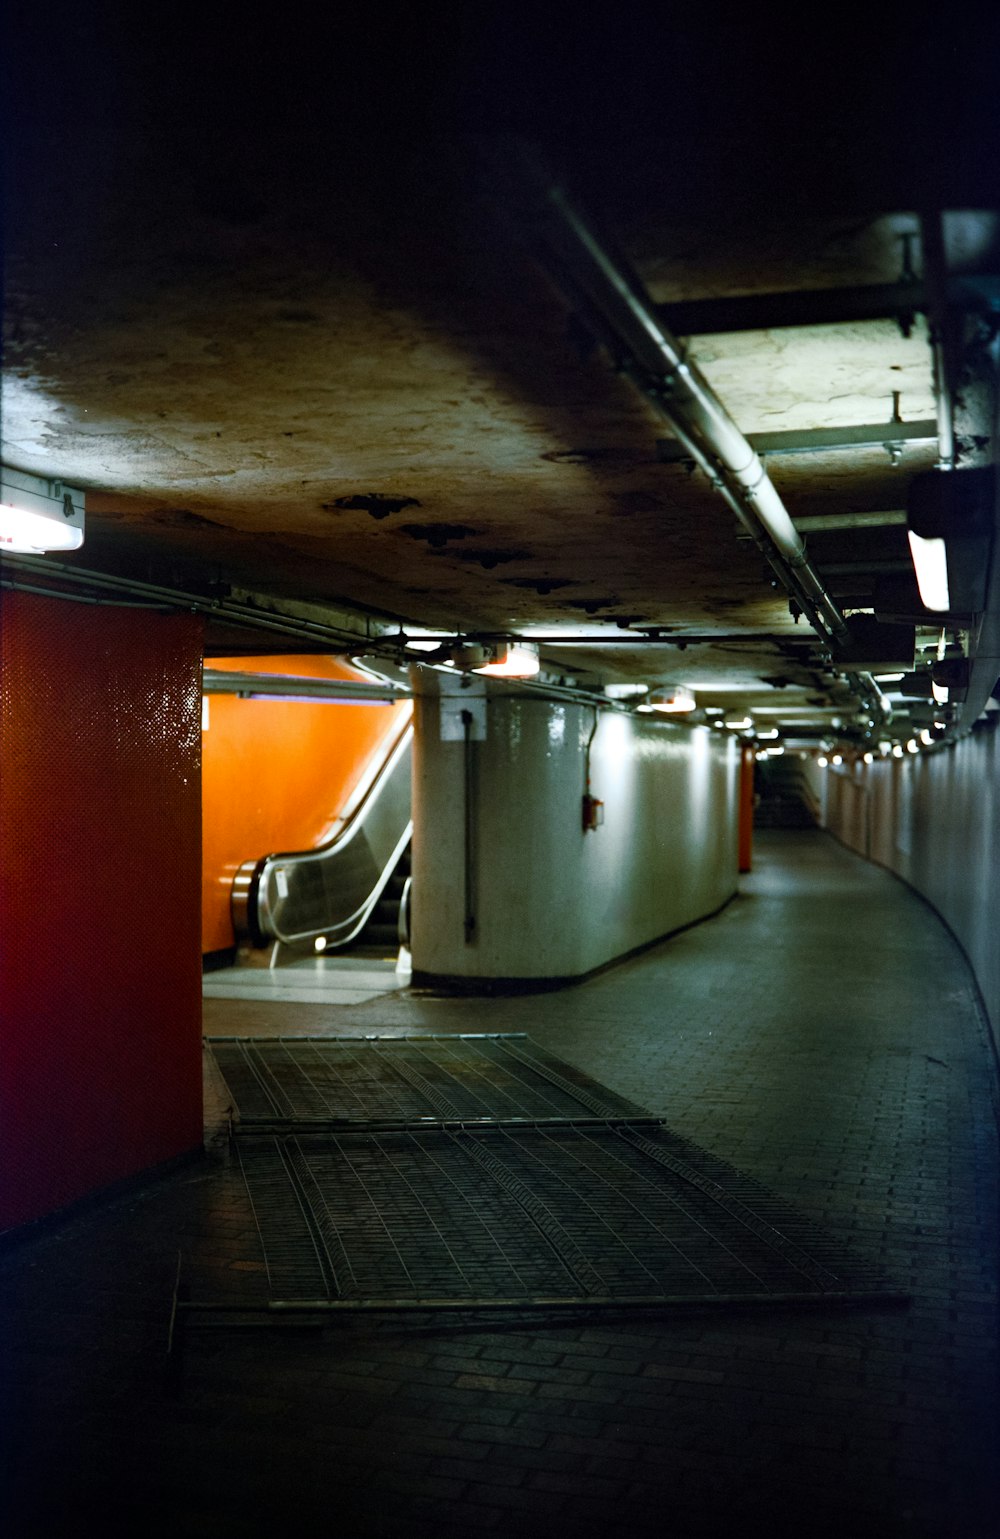 an empty parking garage with an escalator and stairs